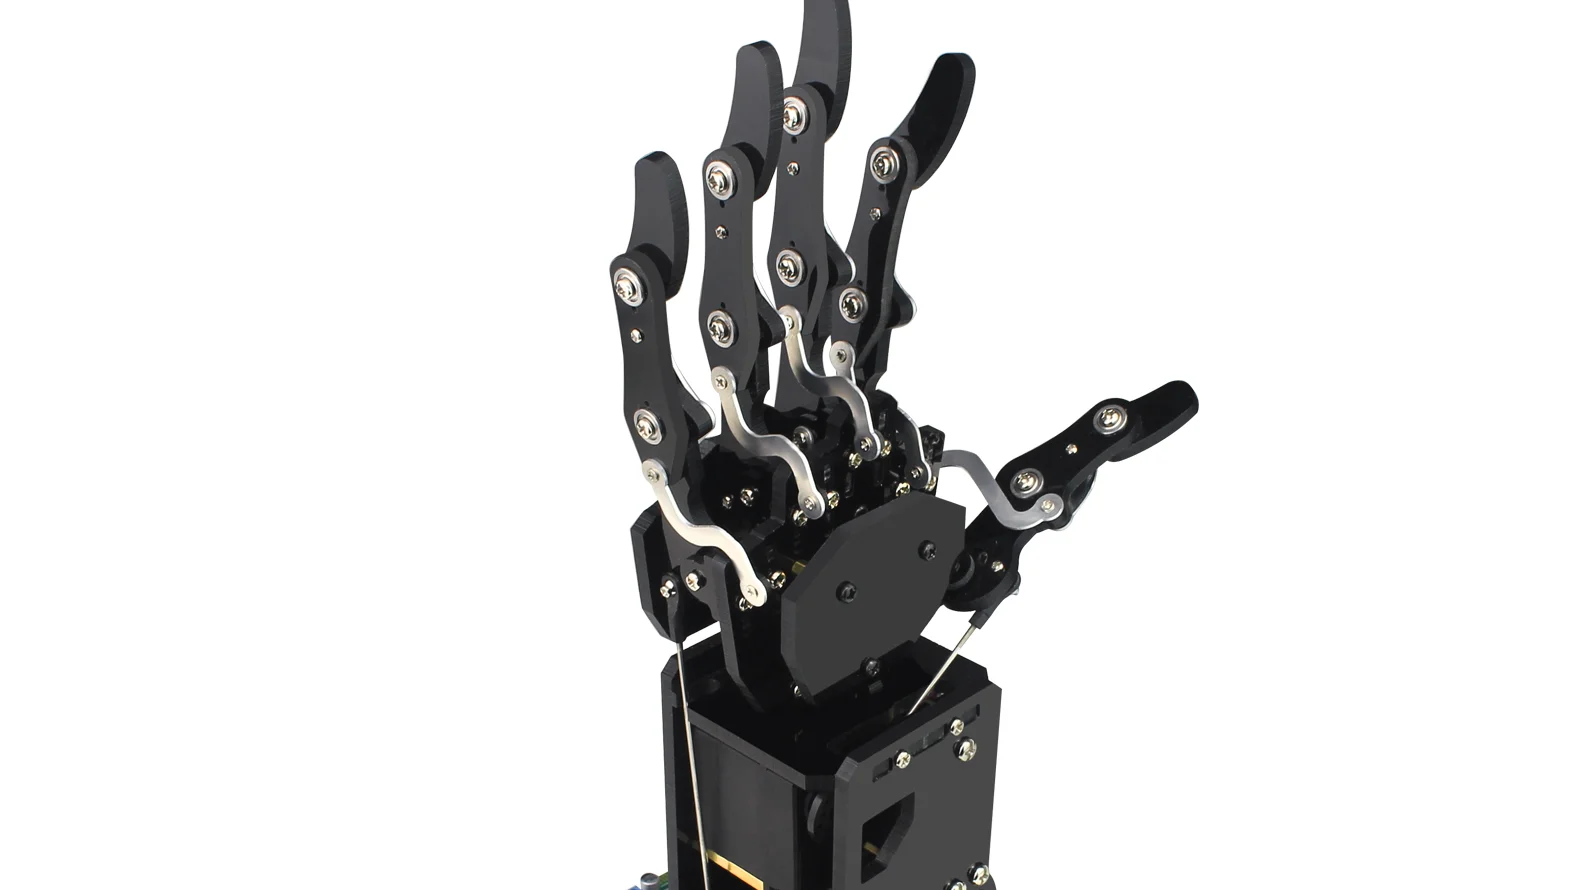 

uHand Palm Mechanical Arm Five Fingers Bionic Robot Hand with Control System for Robotics Teaching Training